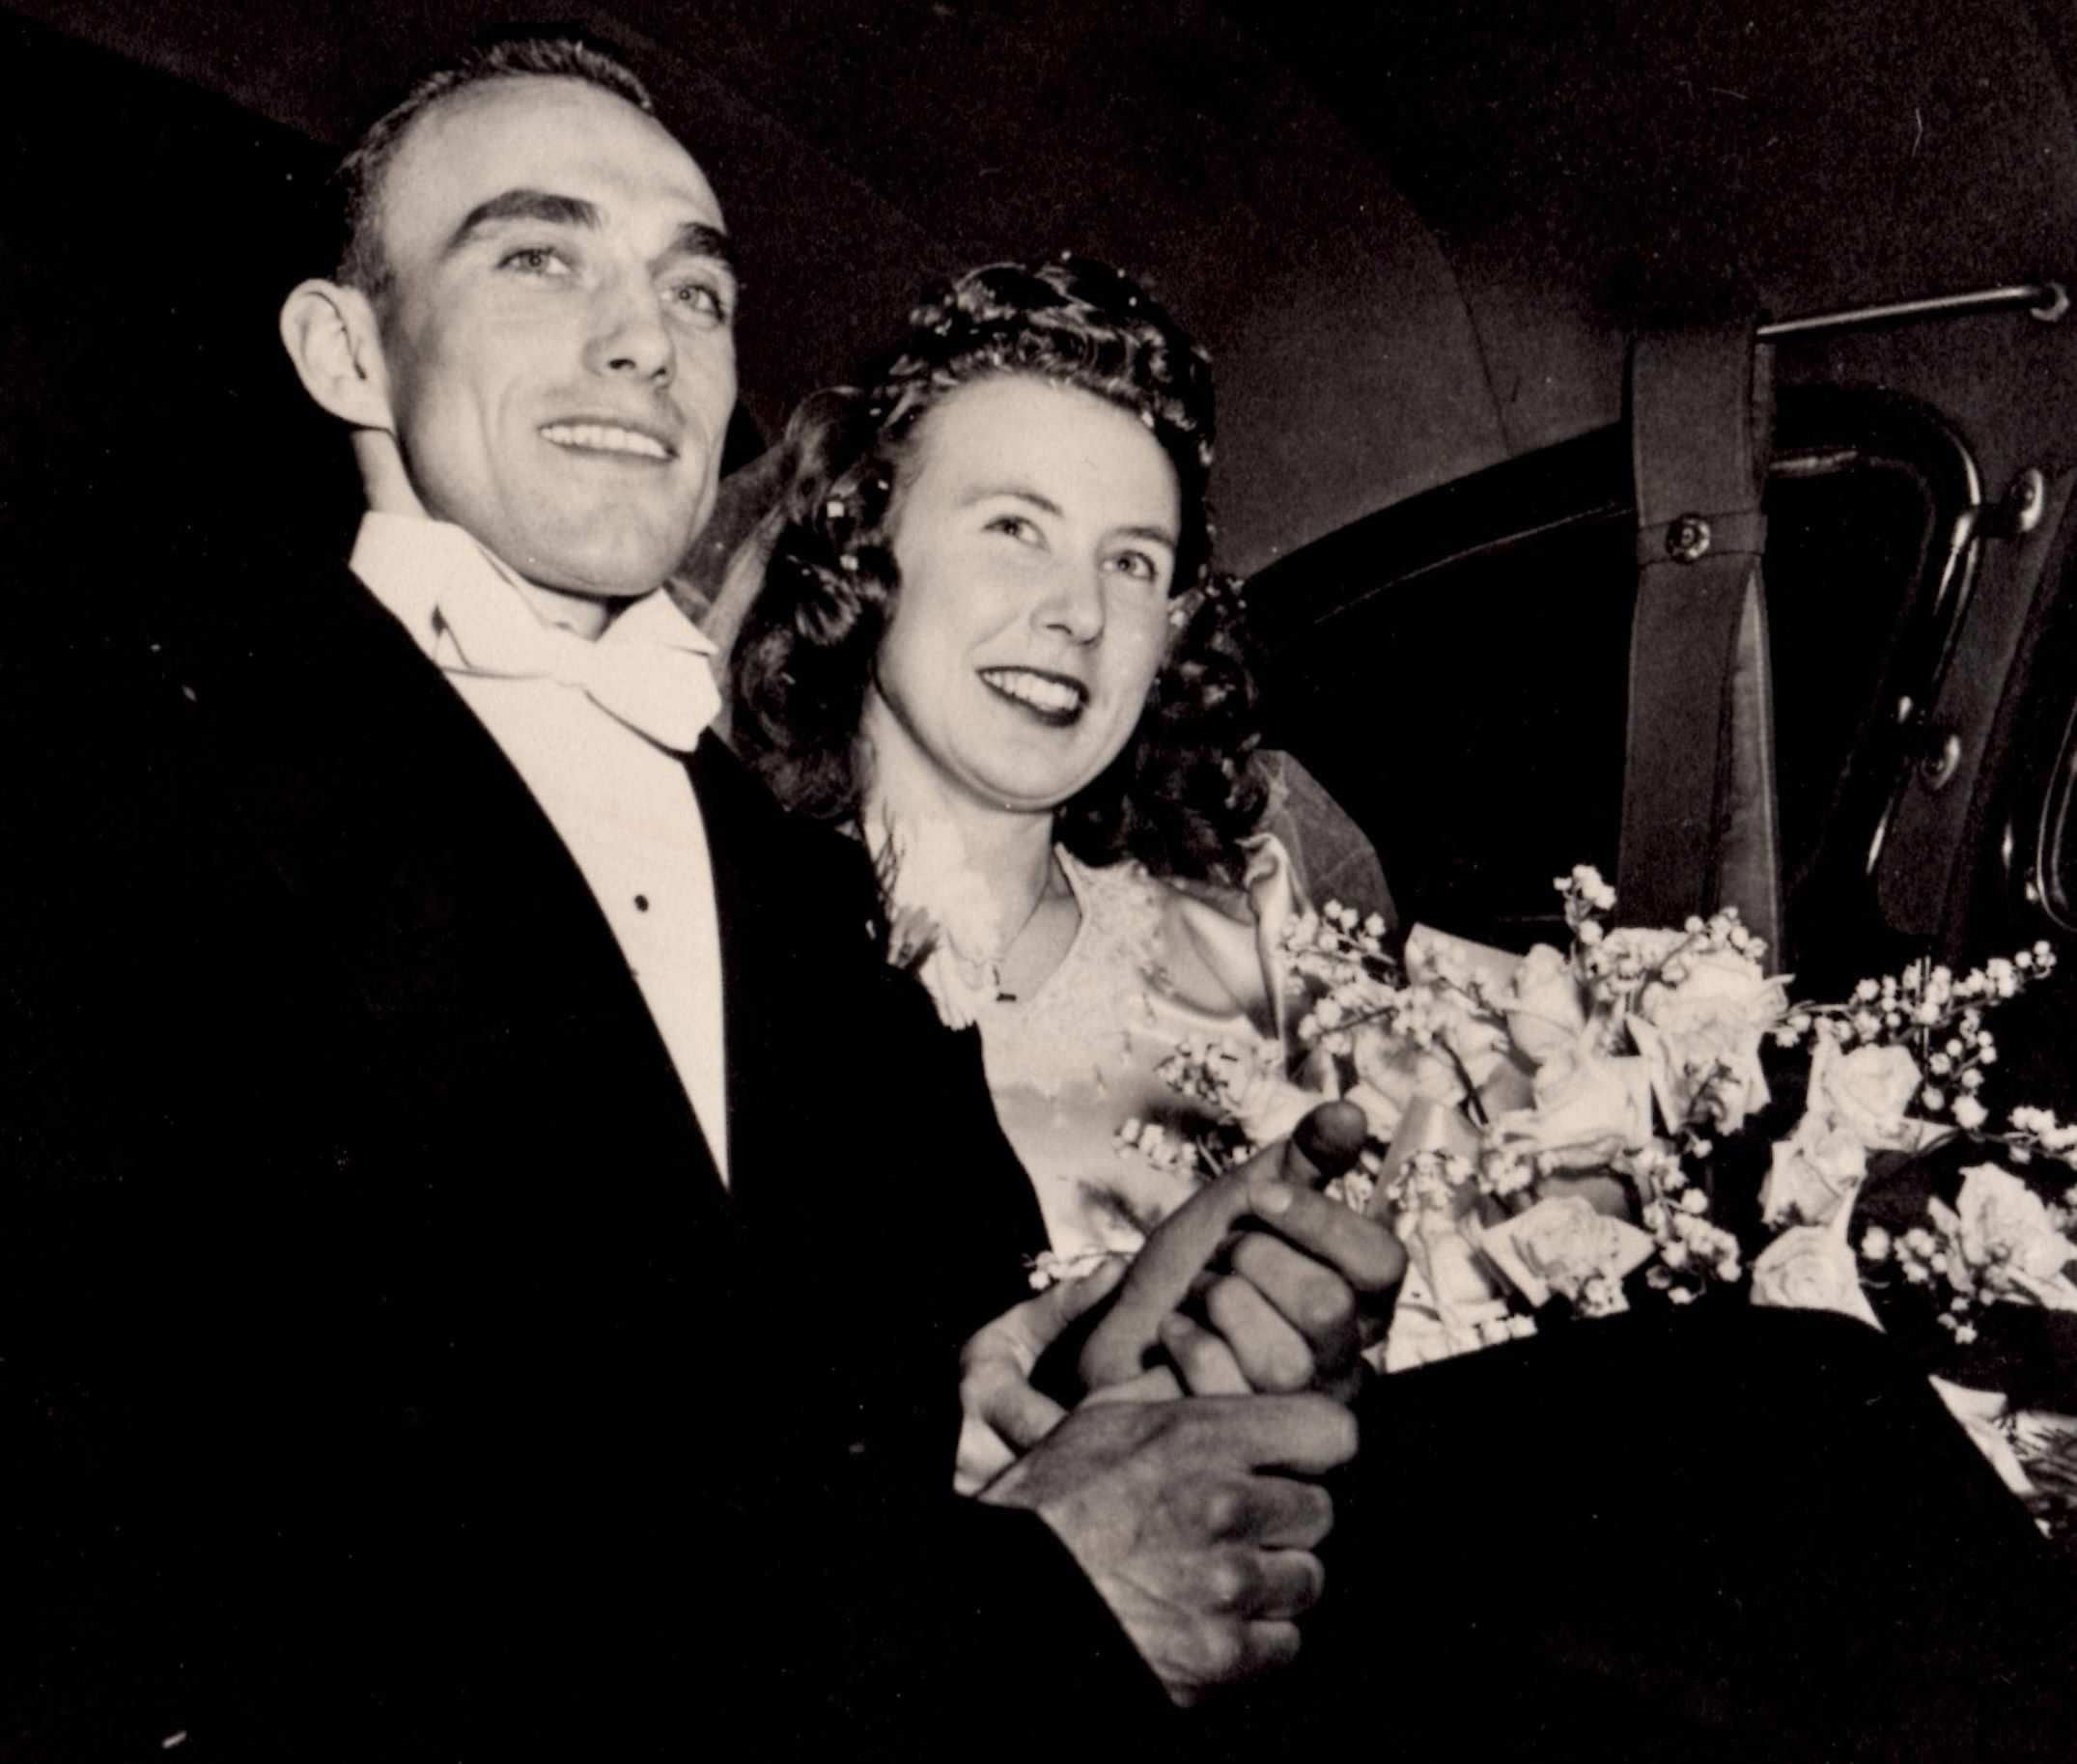 Tom and Marie Rew on their wedding day, March 28, 1947, in New York City.